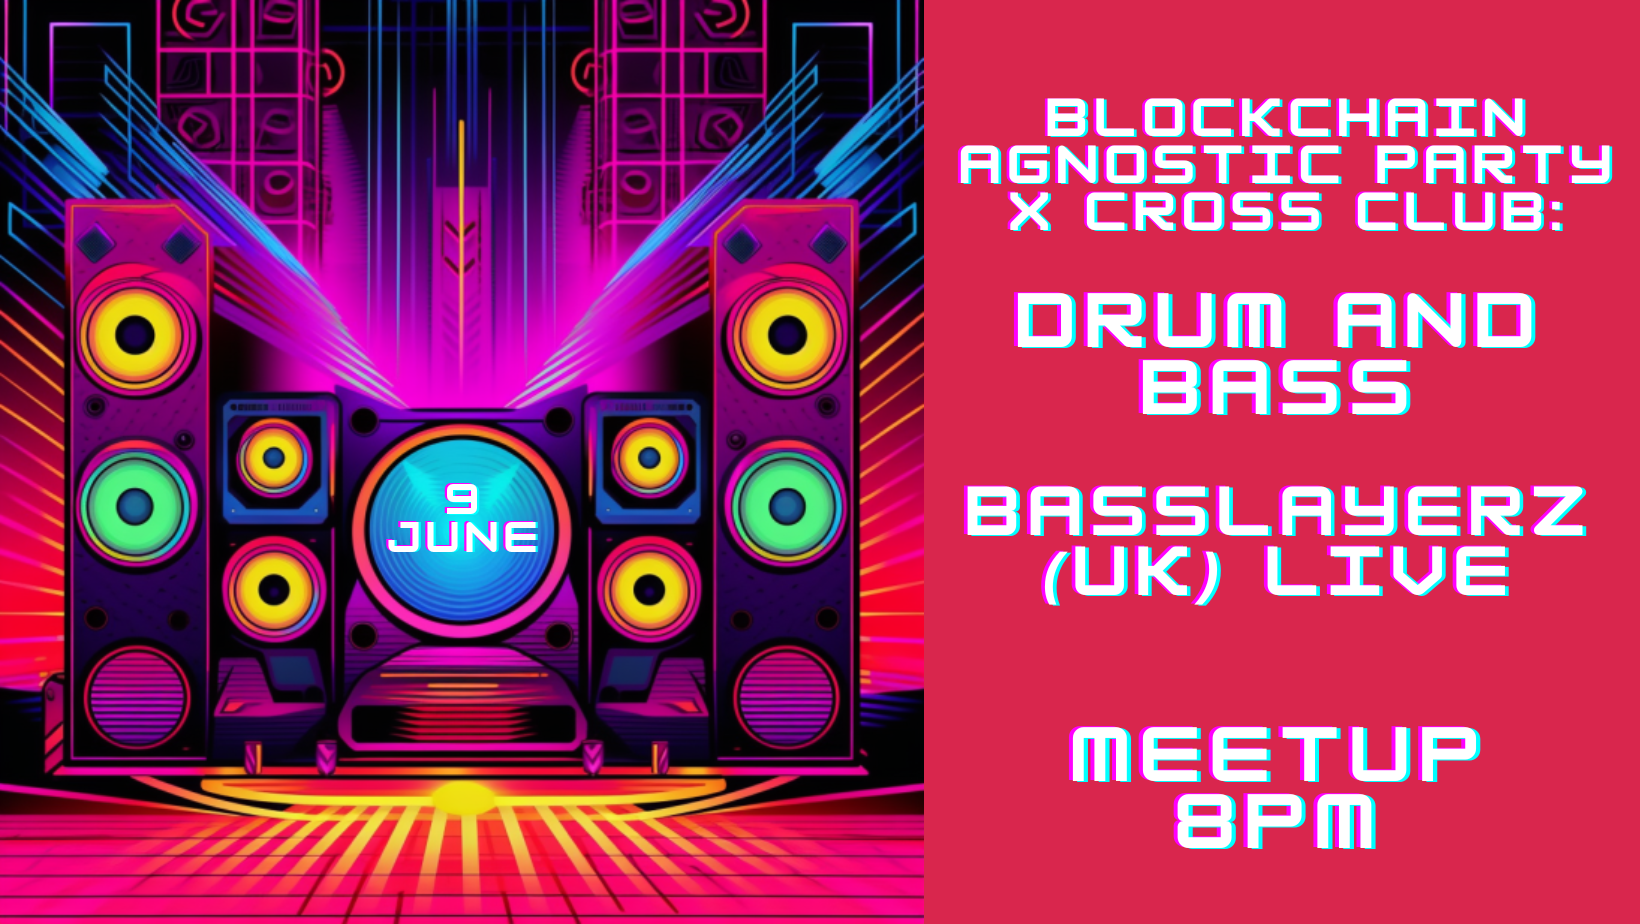 9 JUNE - BLOCKCHAIN AGNOSTIC PARTY at CROSS CLUB drum and bass BASSLAYERZ (UK) LIVE